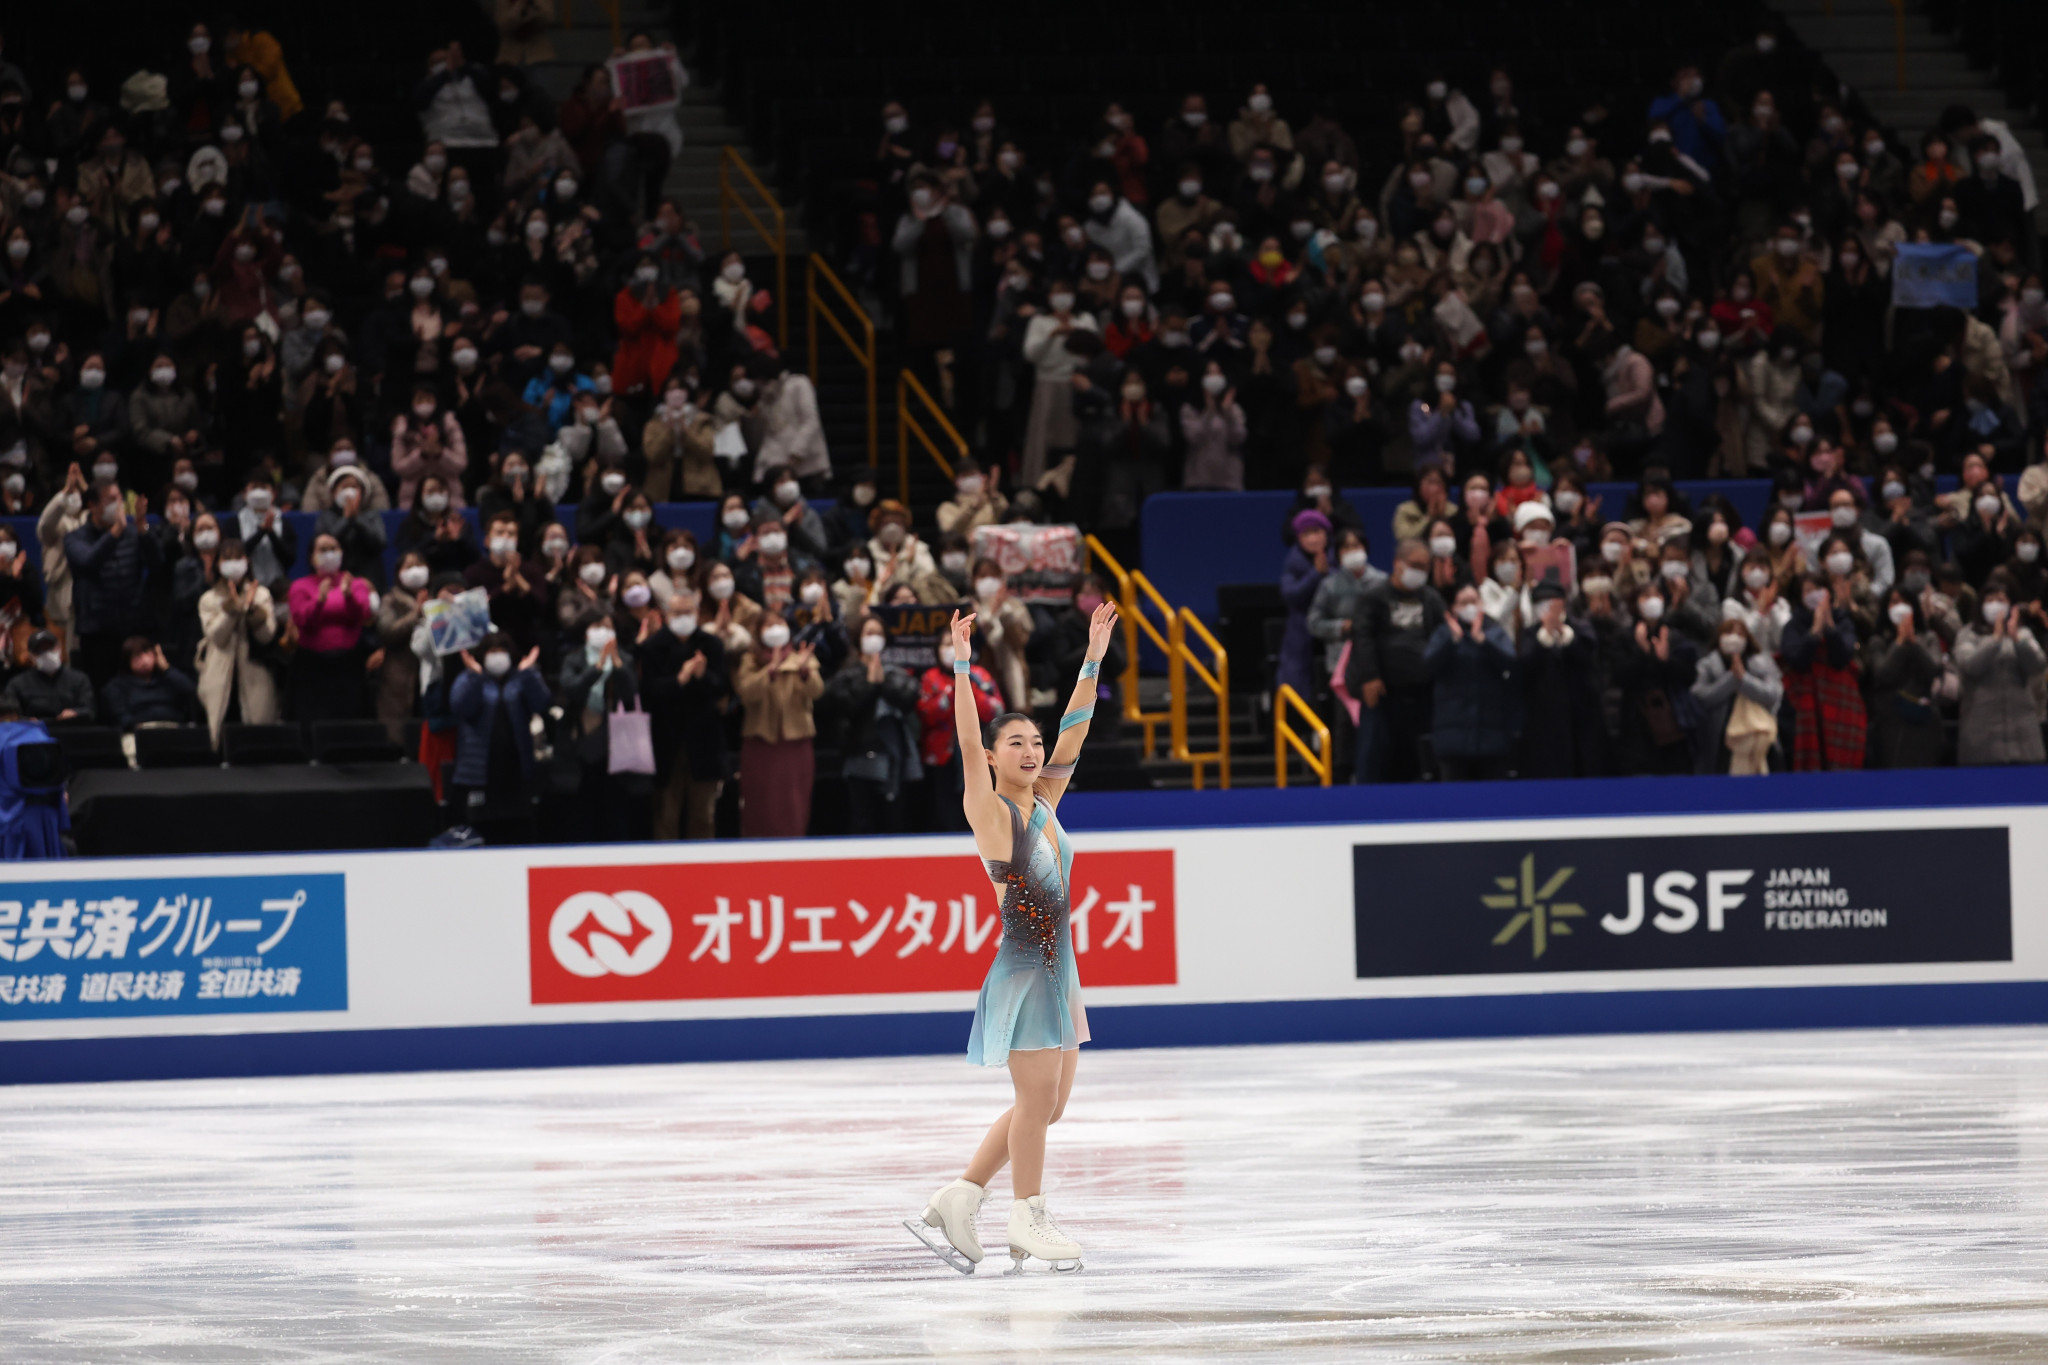 Kaori Sakamoto reveled in the applause after producing an excellent performance at the Saitama Super Arena ©Getty Images